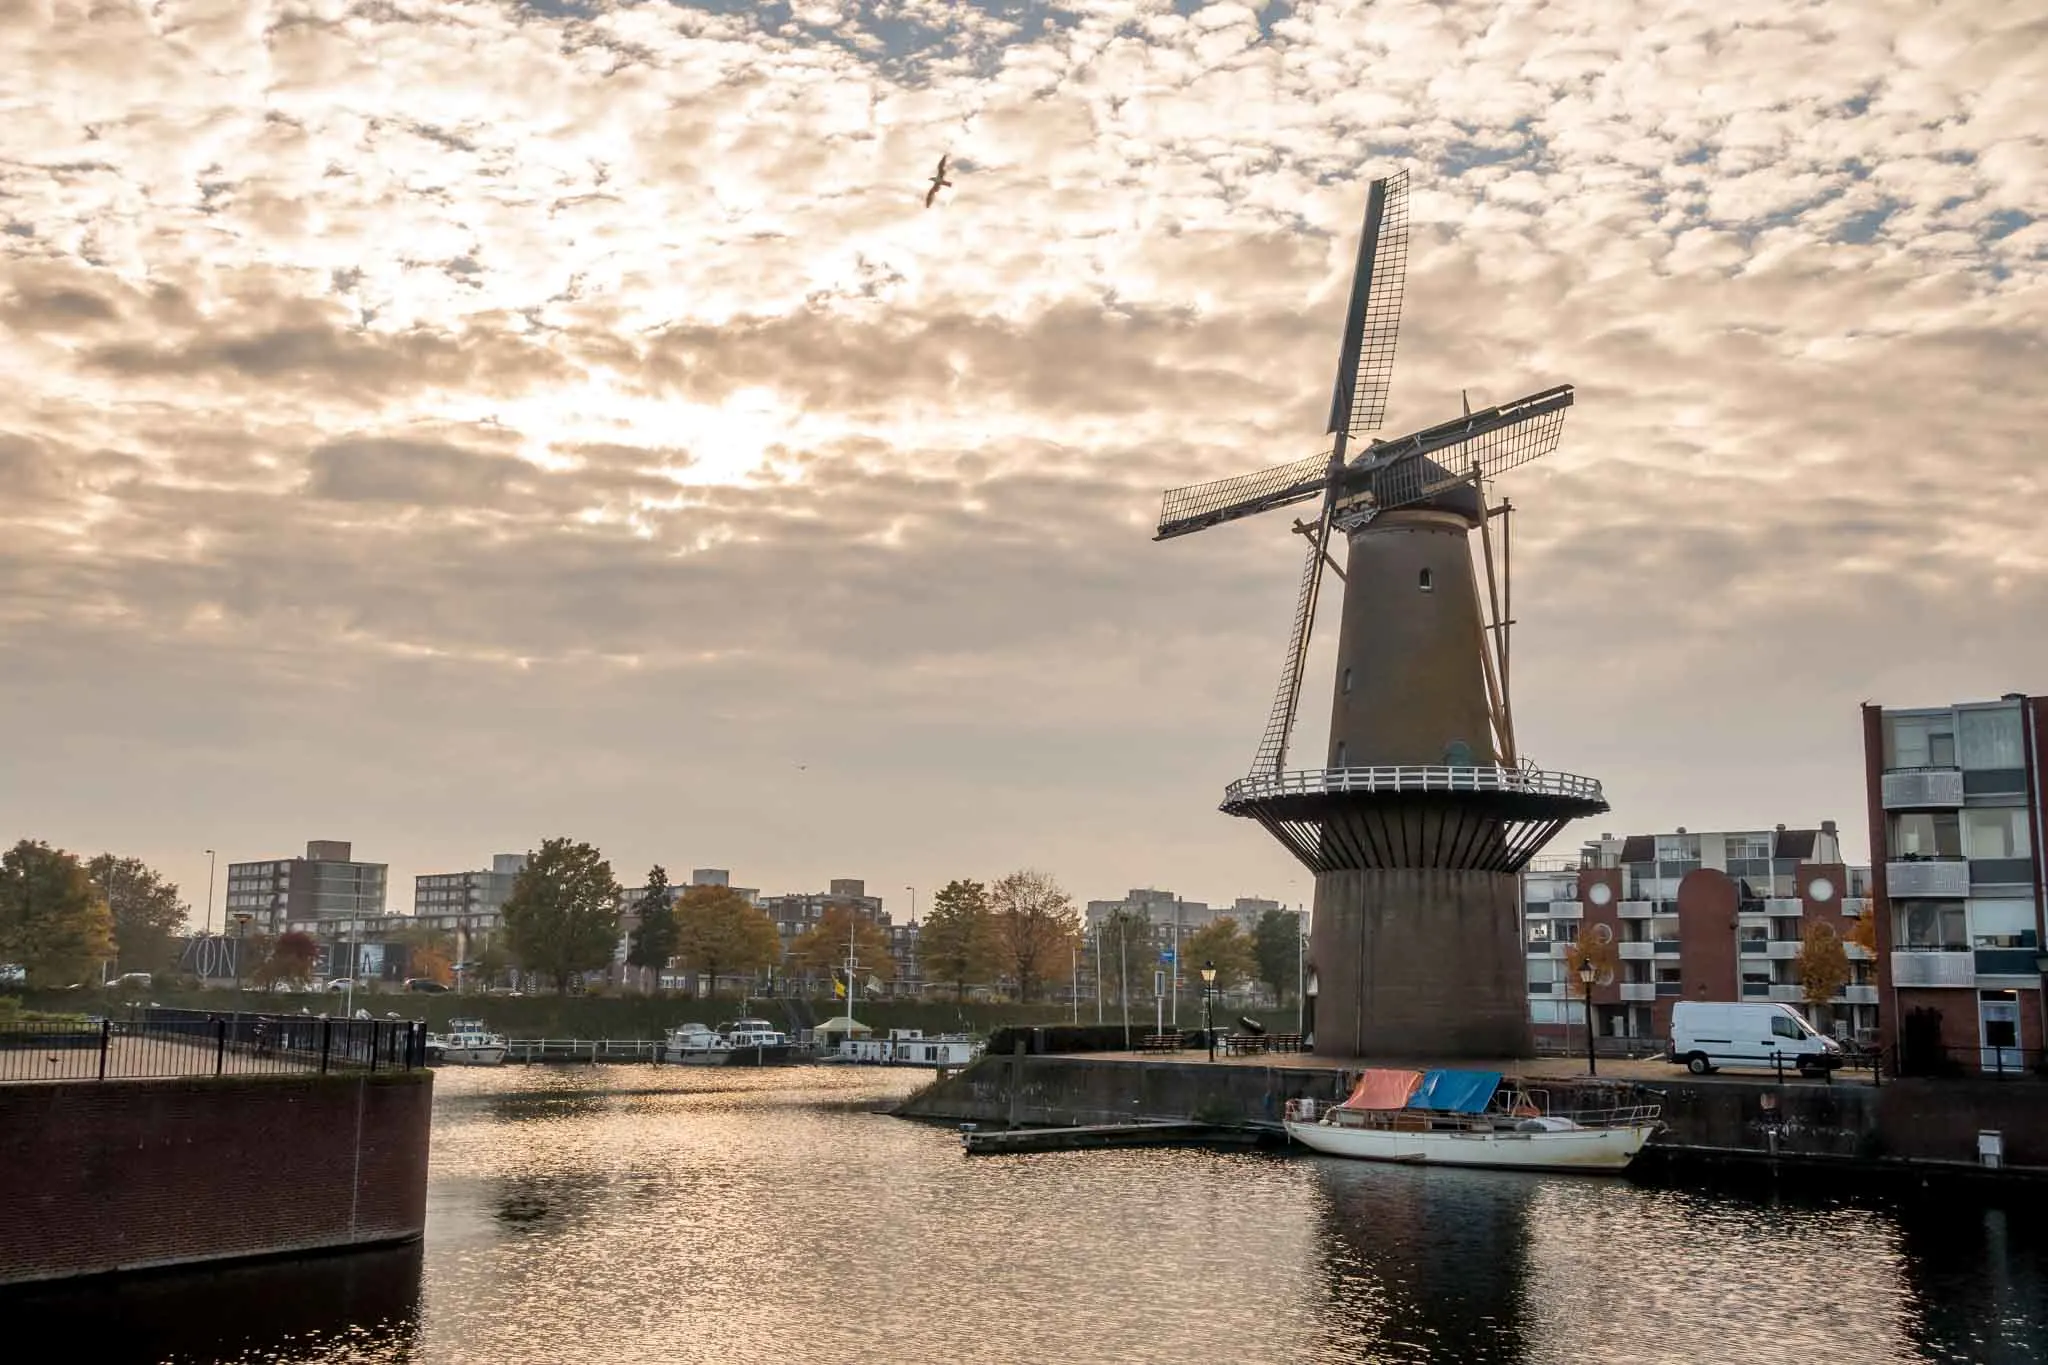 The mill in the Delfshaven section of Rotterdam, a great day trip from Amsterdam